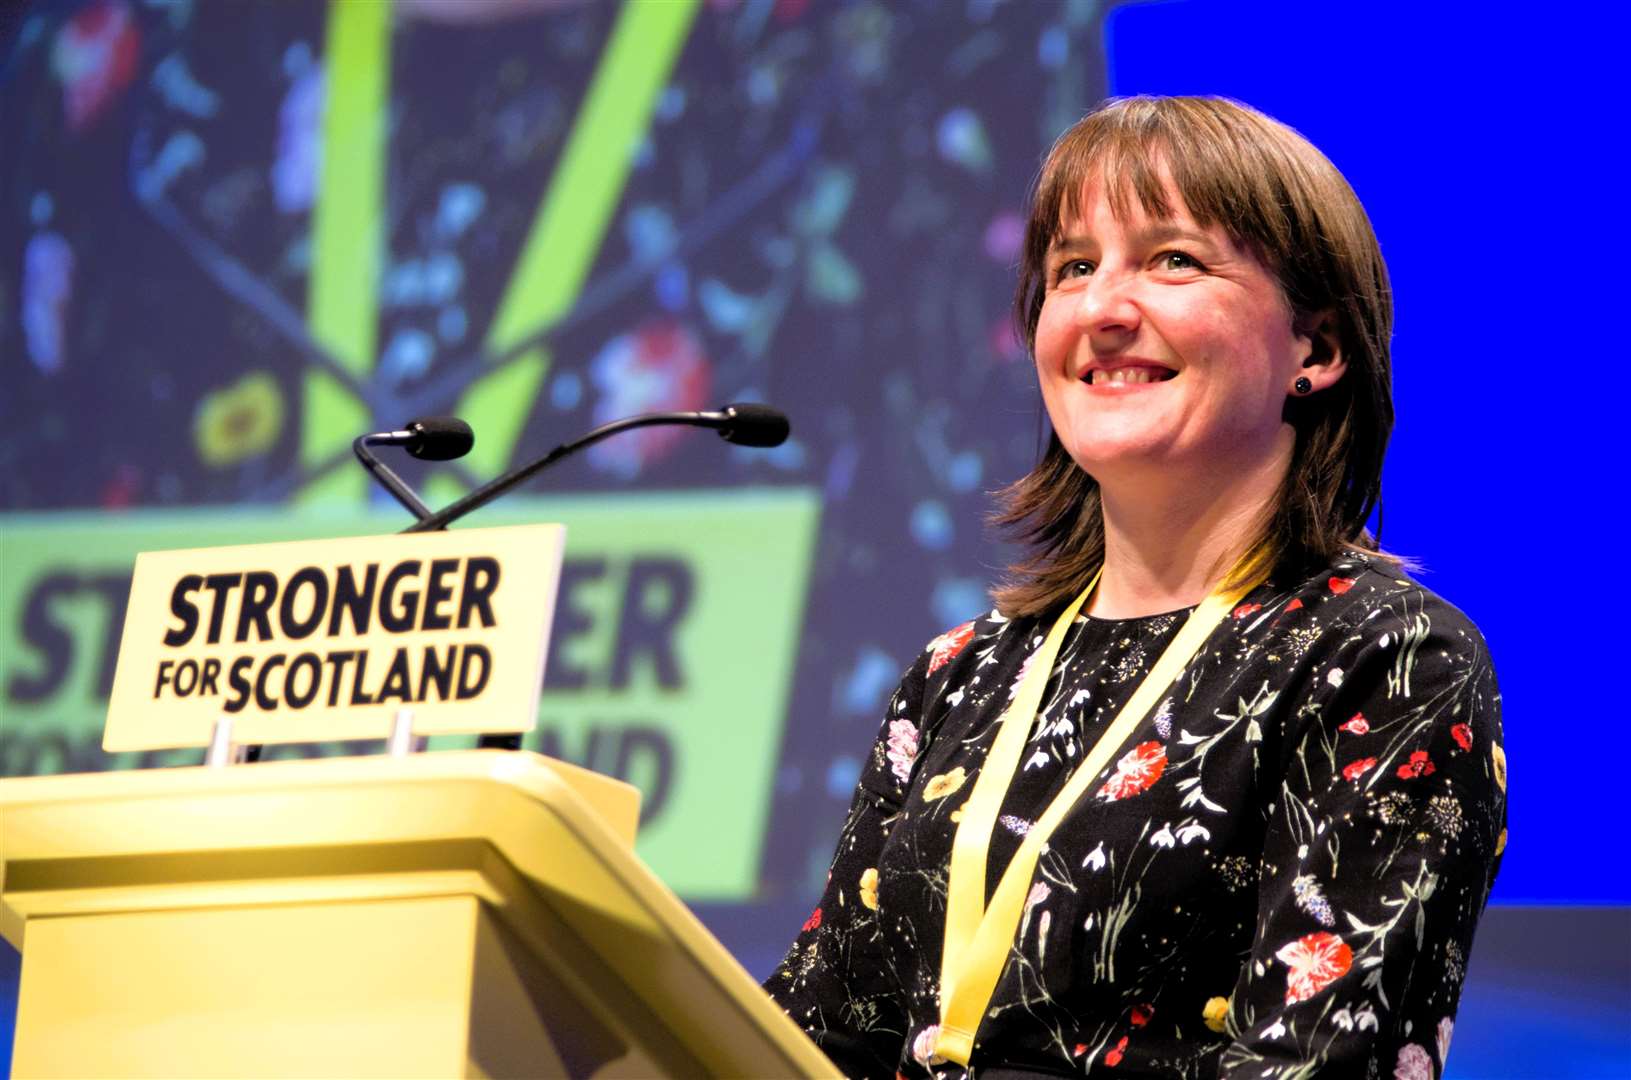 Maree Todd MSP said that this SNP government will prioritise eradicating child poverty and driving economic growth in the Highlands.